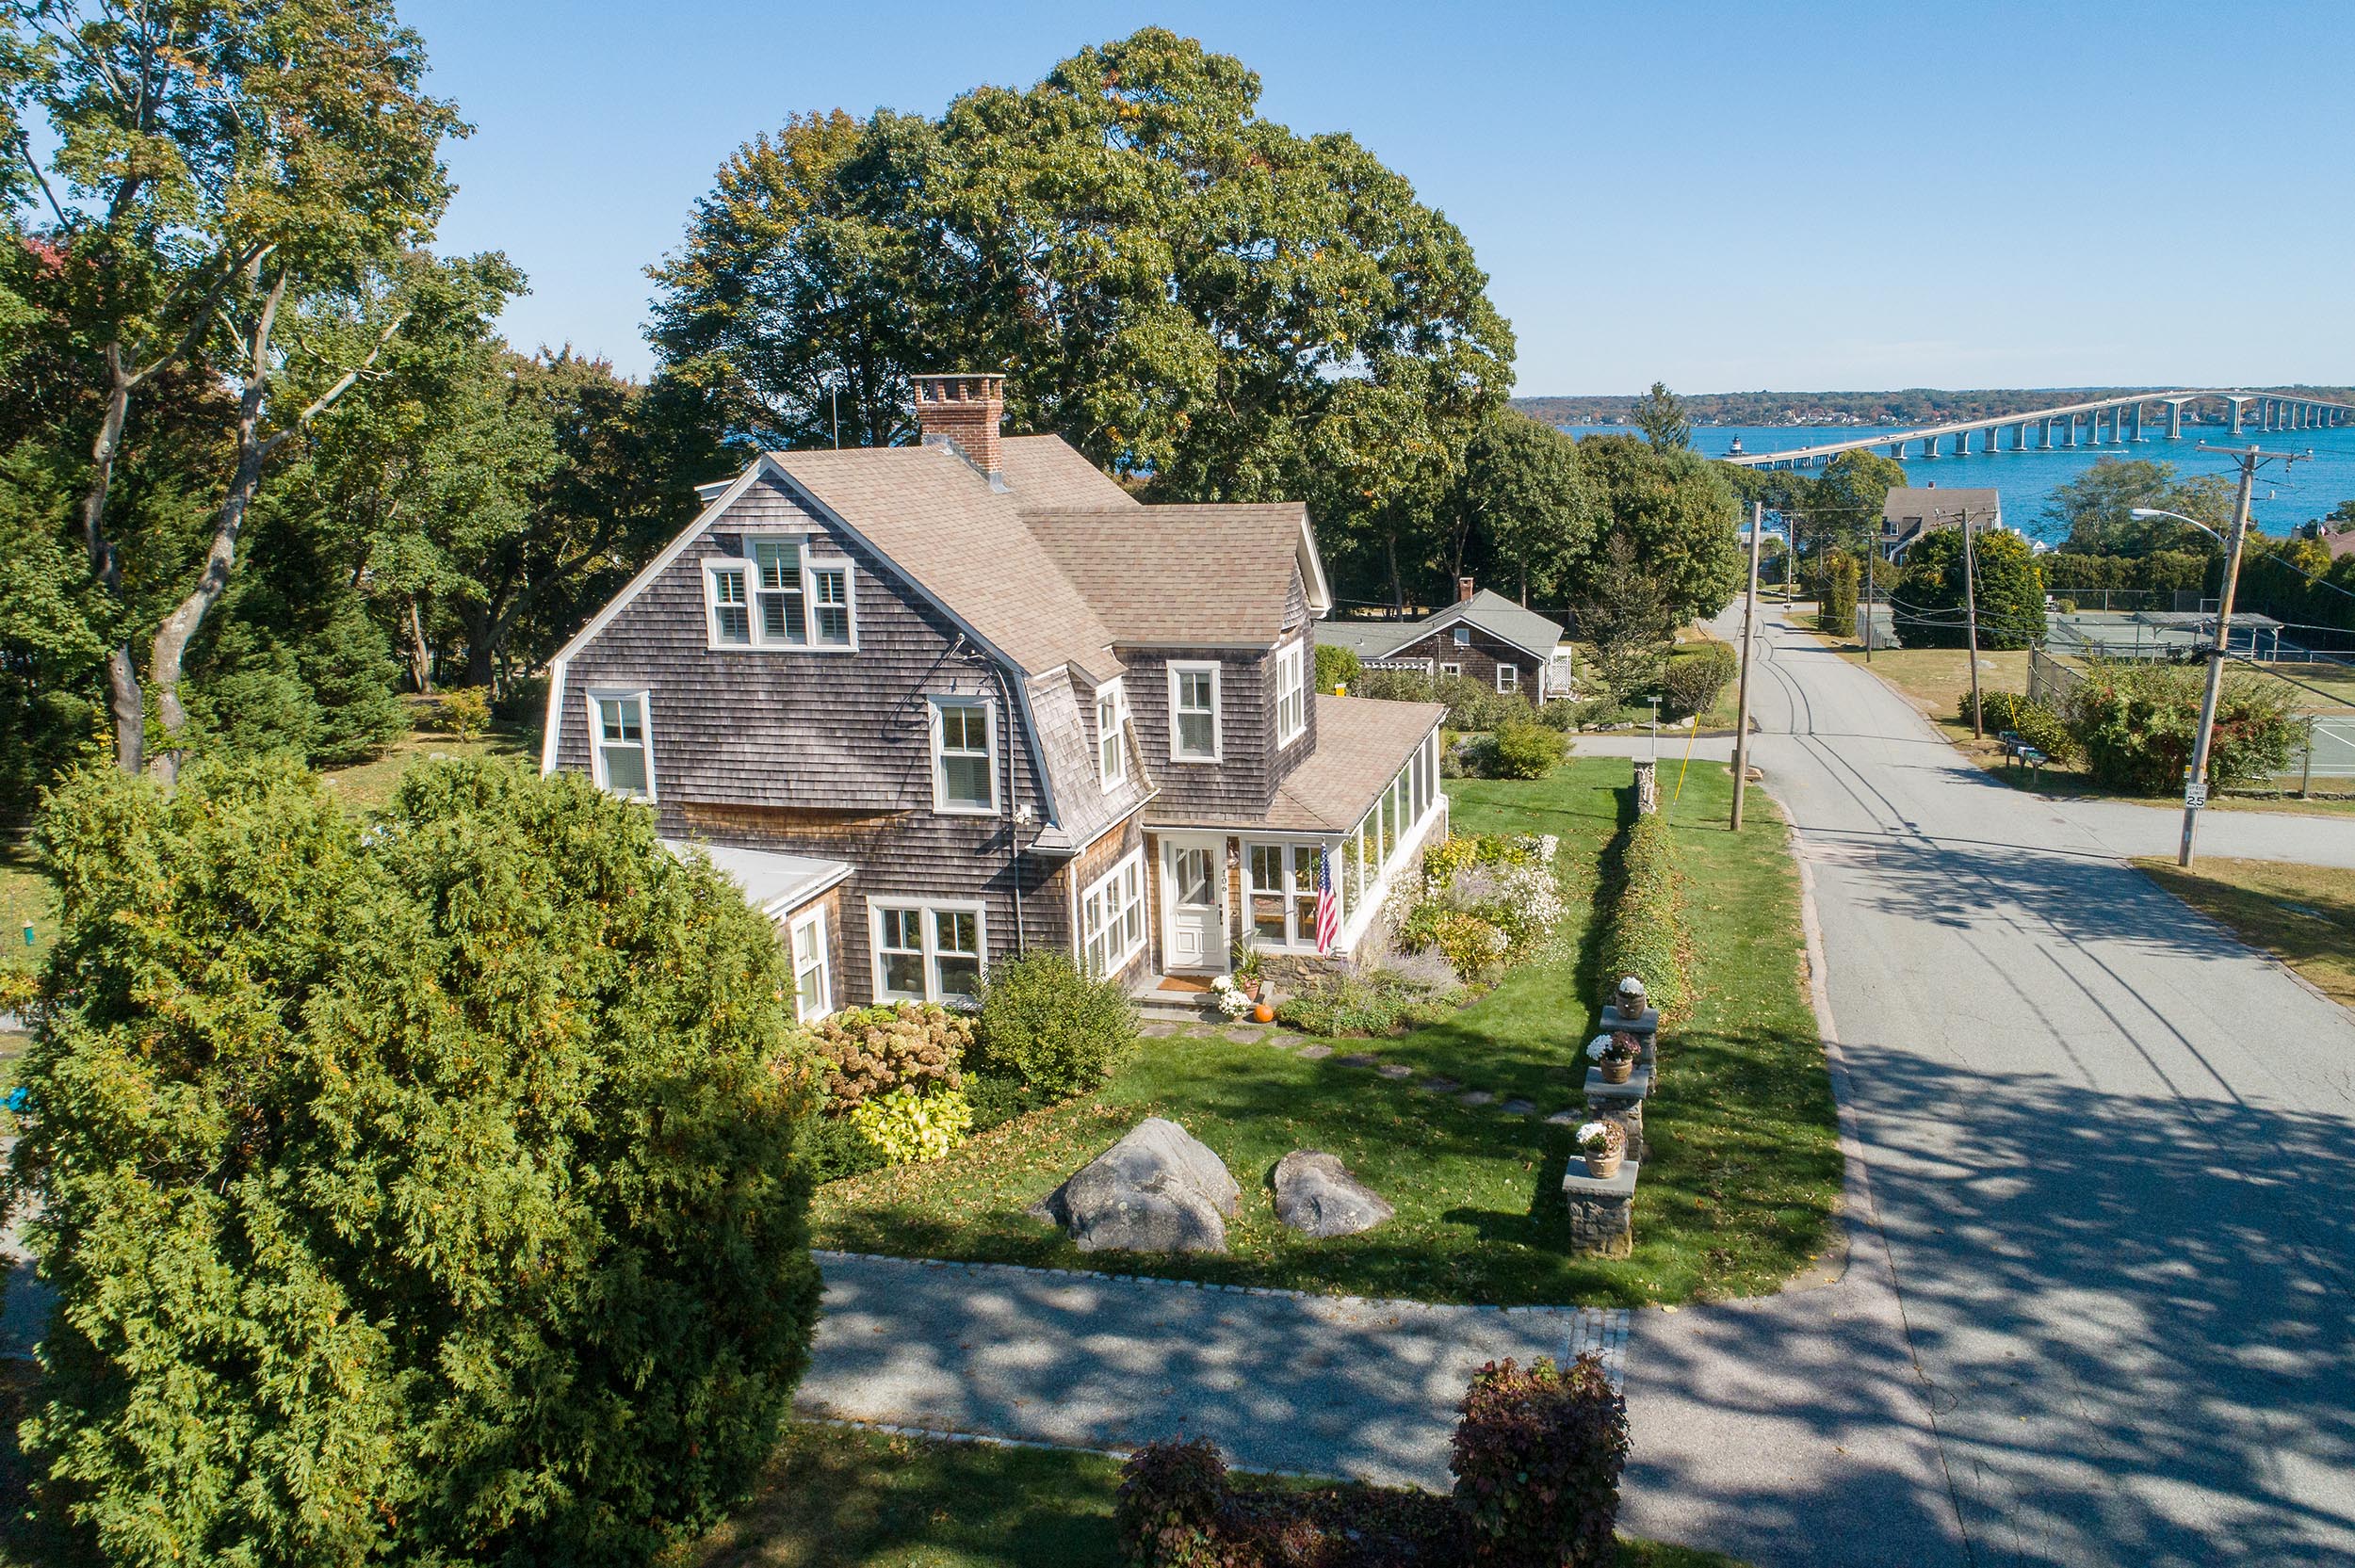 LILA DELMAN ASSOCIATES REPRESENT BOTH SELLER AND BUYER  OF PLUM BEACH SHINGLE-STYLE HOME FOR $1.180M